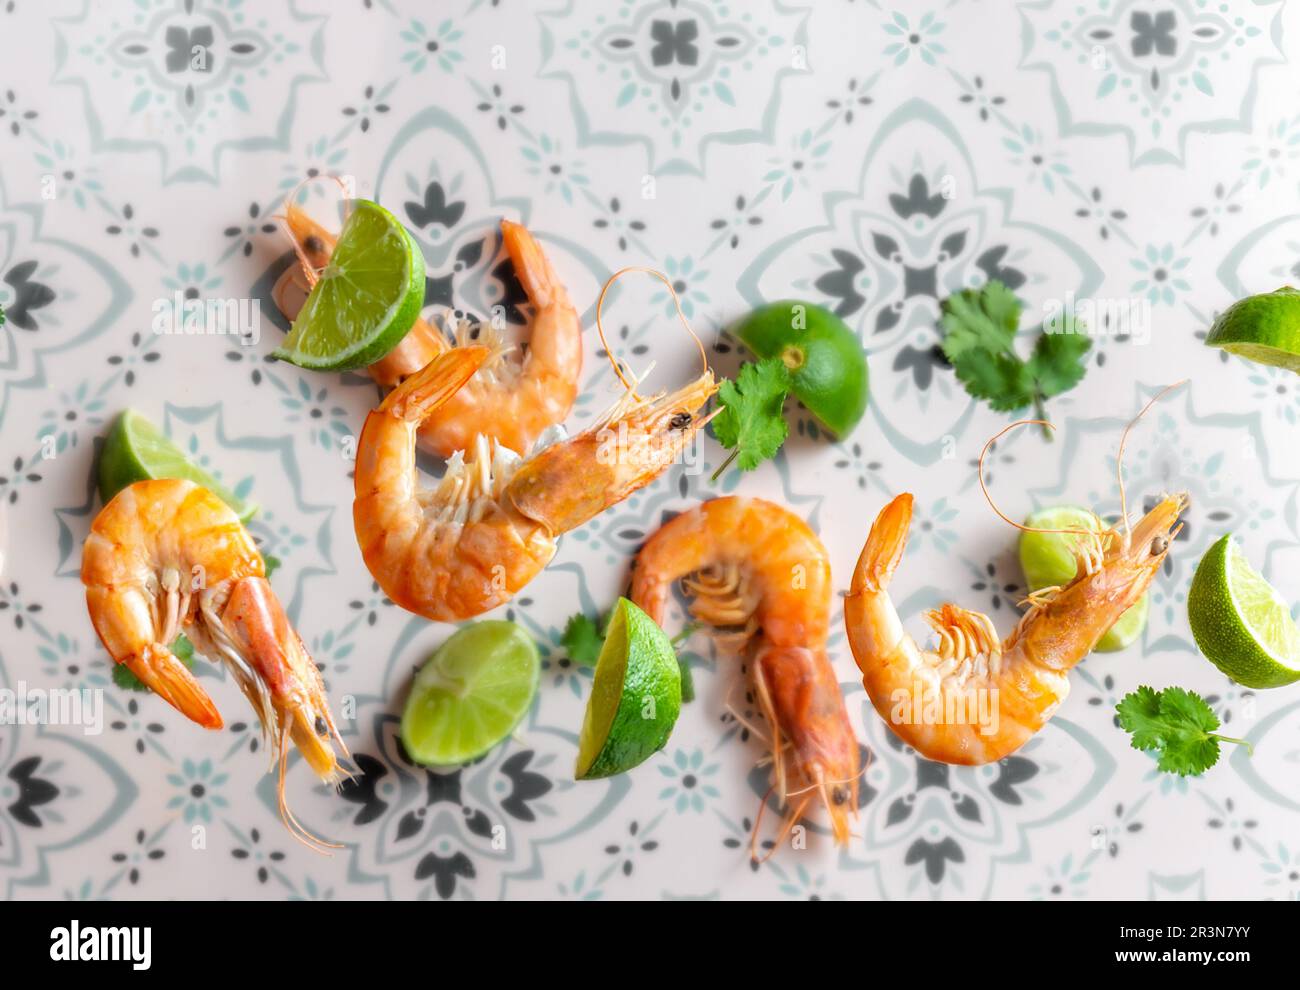 Flying food. Seafood shrimps prawns with cilantro and lemon. Mexican ceramic background Stock Photo